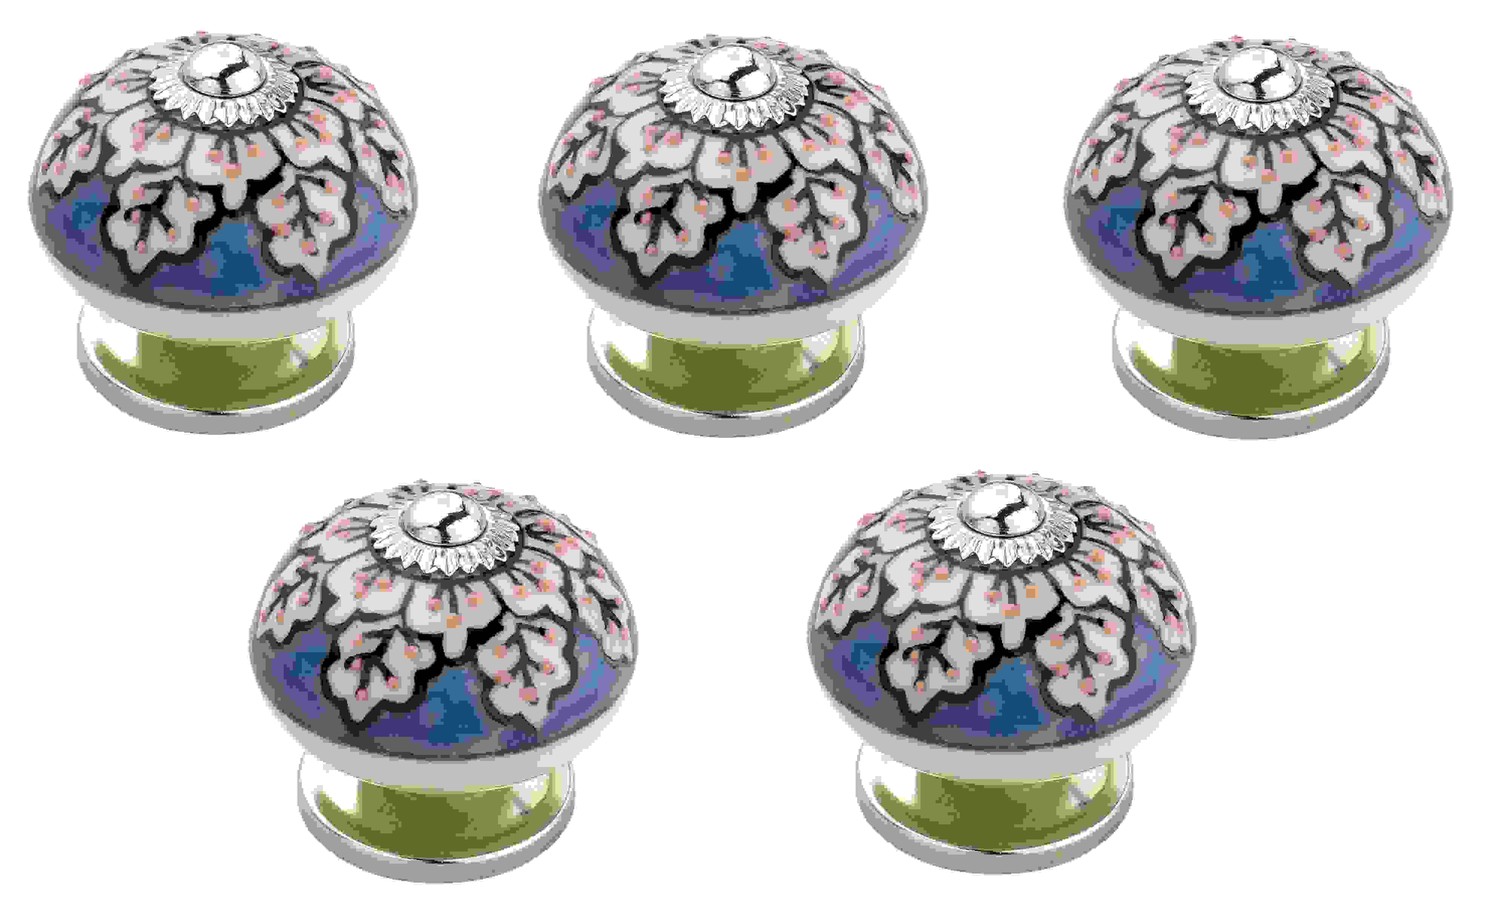 Flowers 1-3/5 in. (41mm) Blue & Cream Cabinet Knob (Pack of 5)